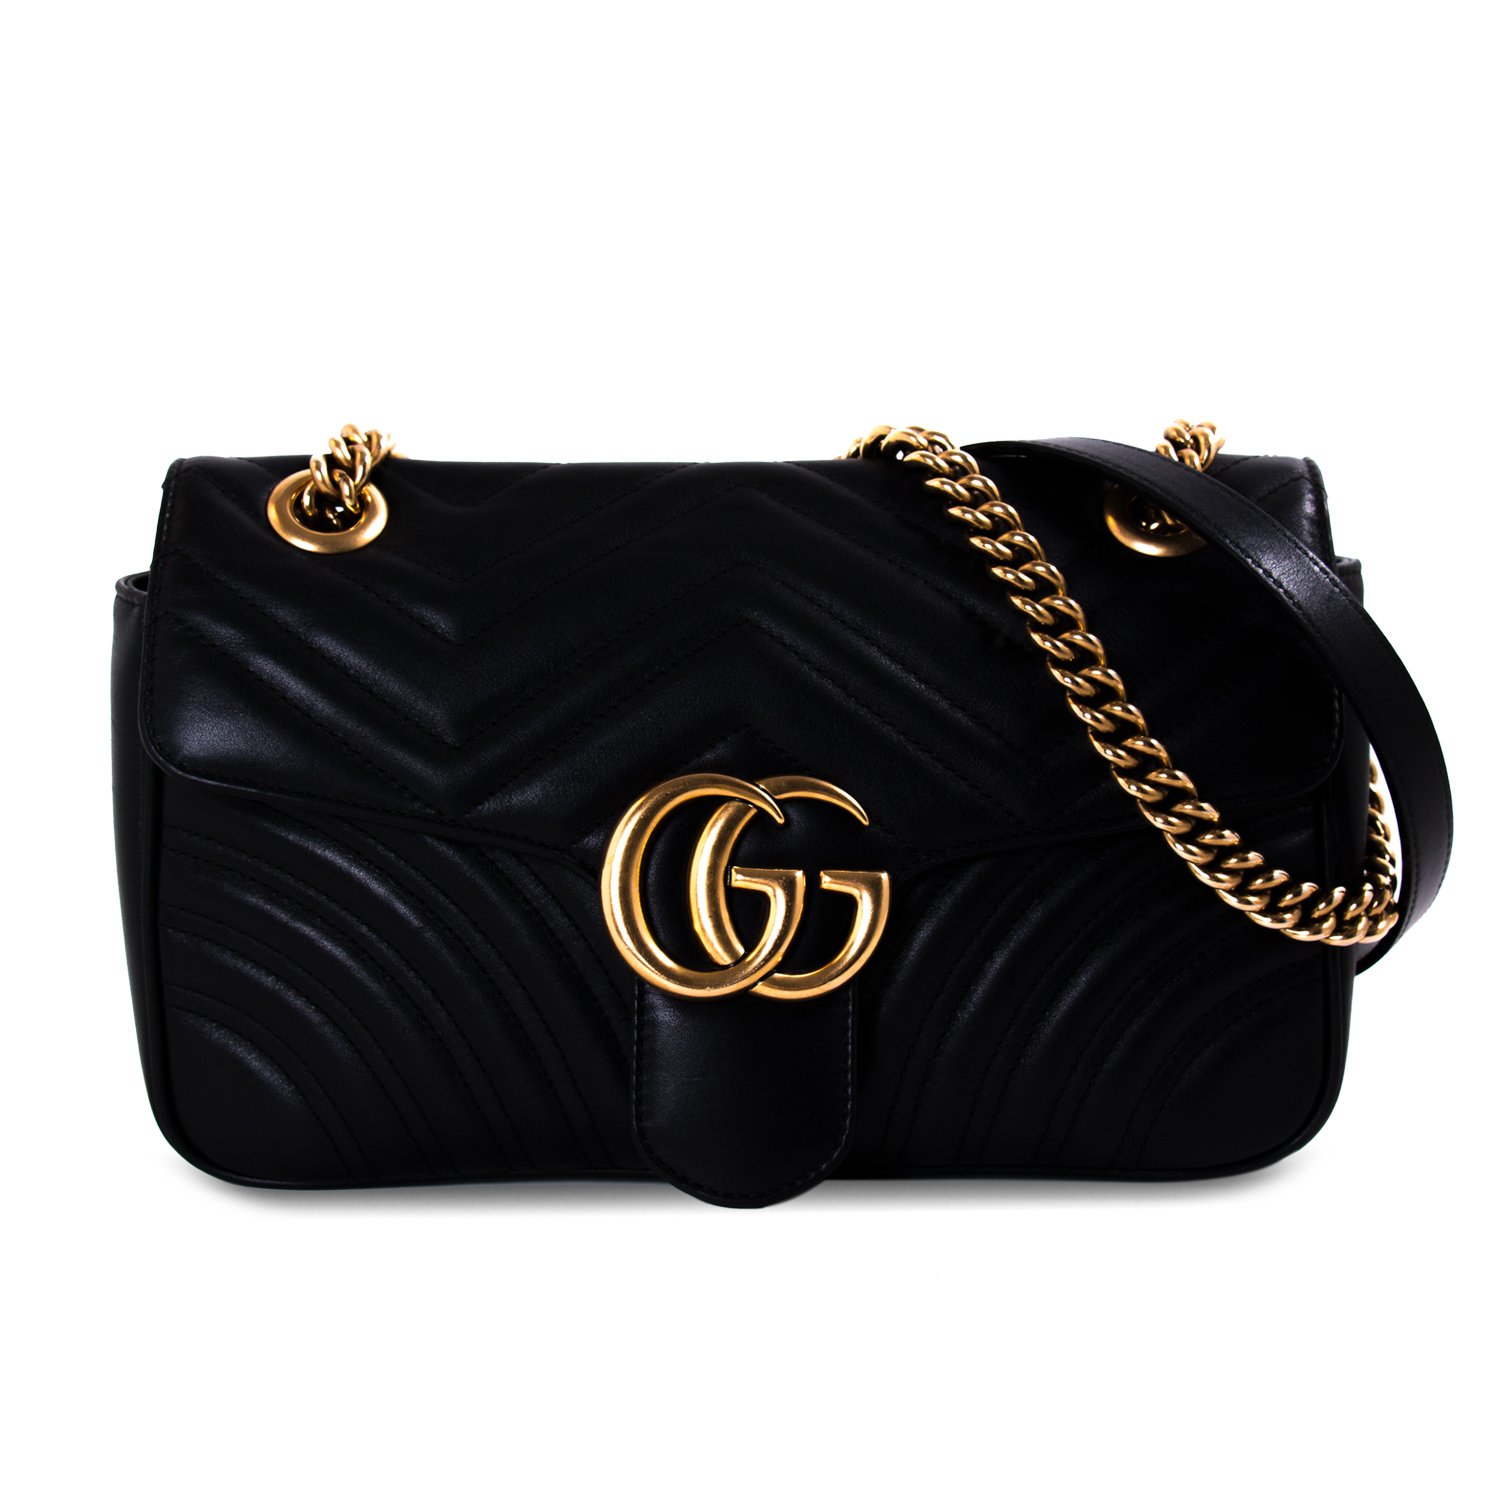 Buy Gucci Bags Online In India at an Affordable Price Range